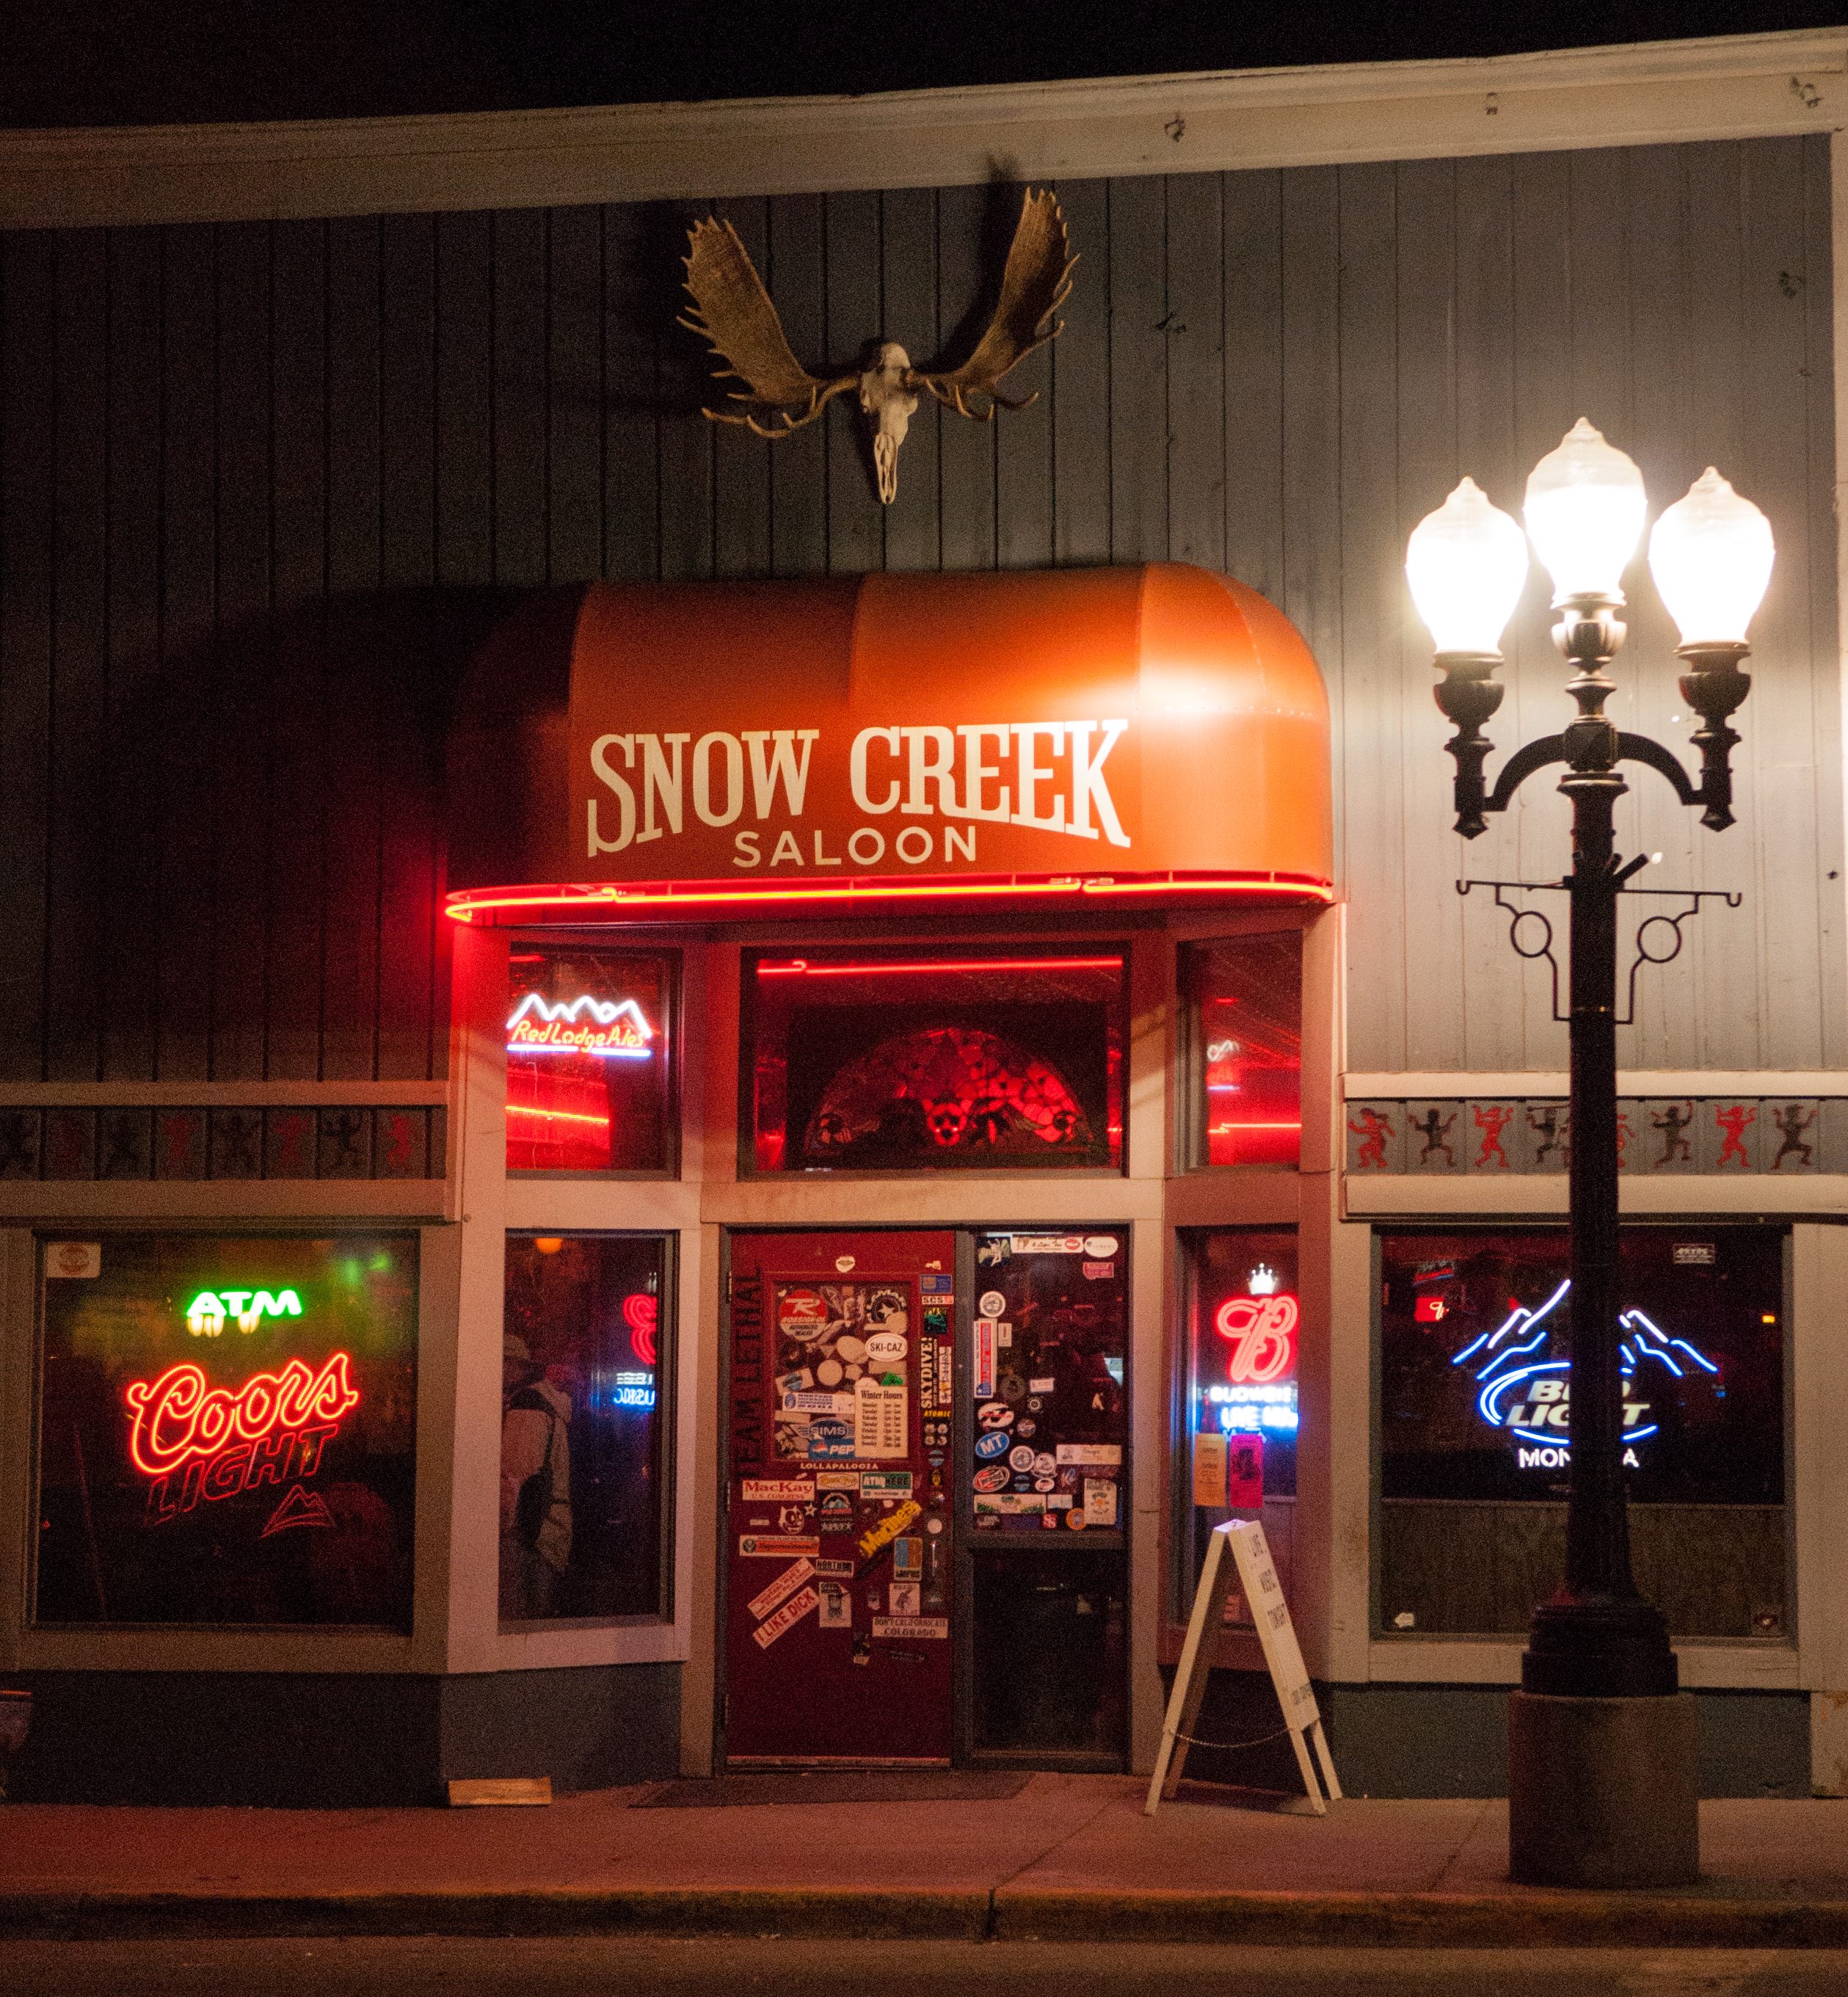 Snow Creek Saloon lit up at night in Red Lodge, Montana